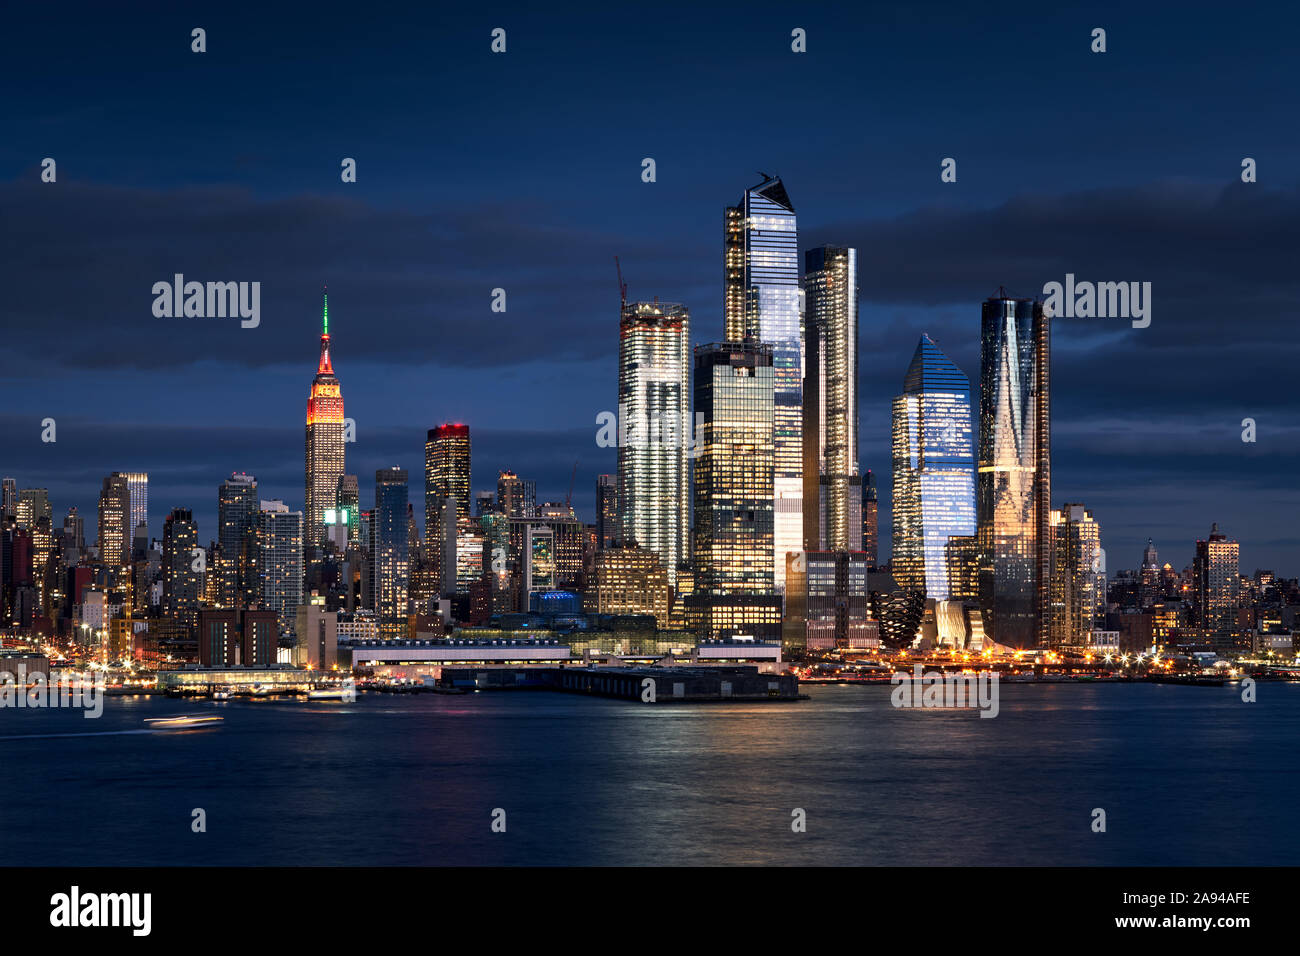 New York City skyline from the Hudson River with the skyscrapers of the Hudson Yards redevelopment project. Manhattan Midtown West, NYC, NY, USA Stock Photo